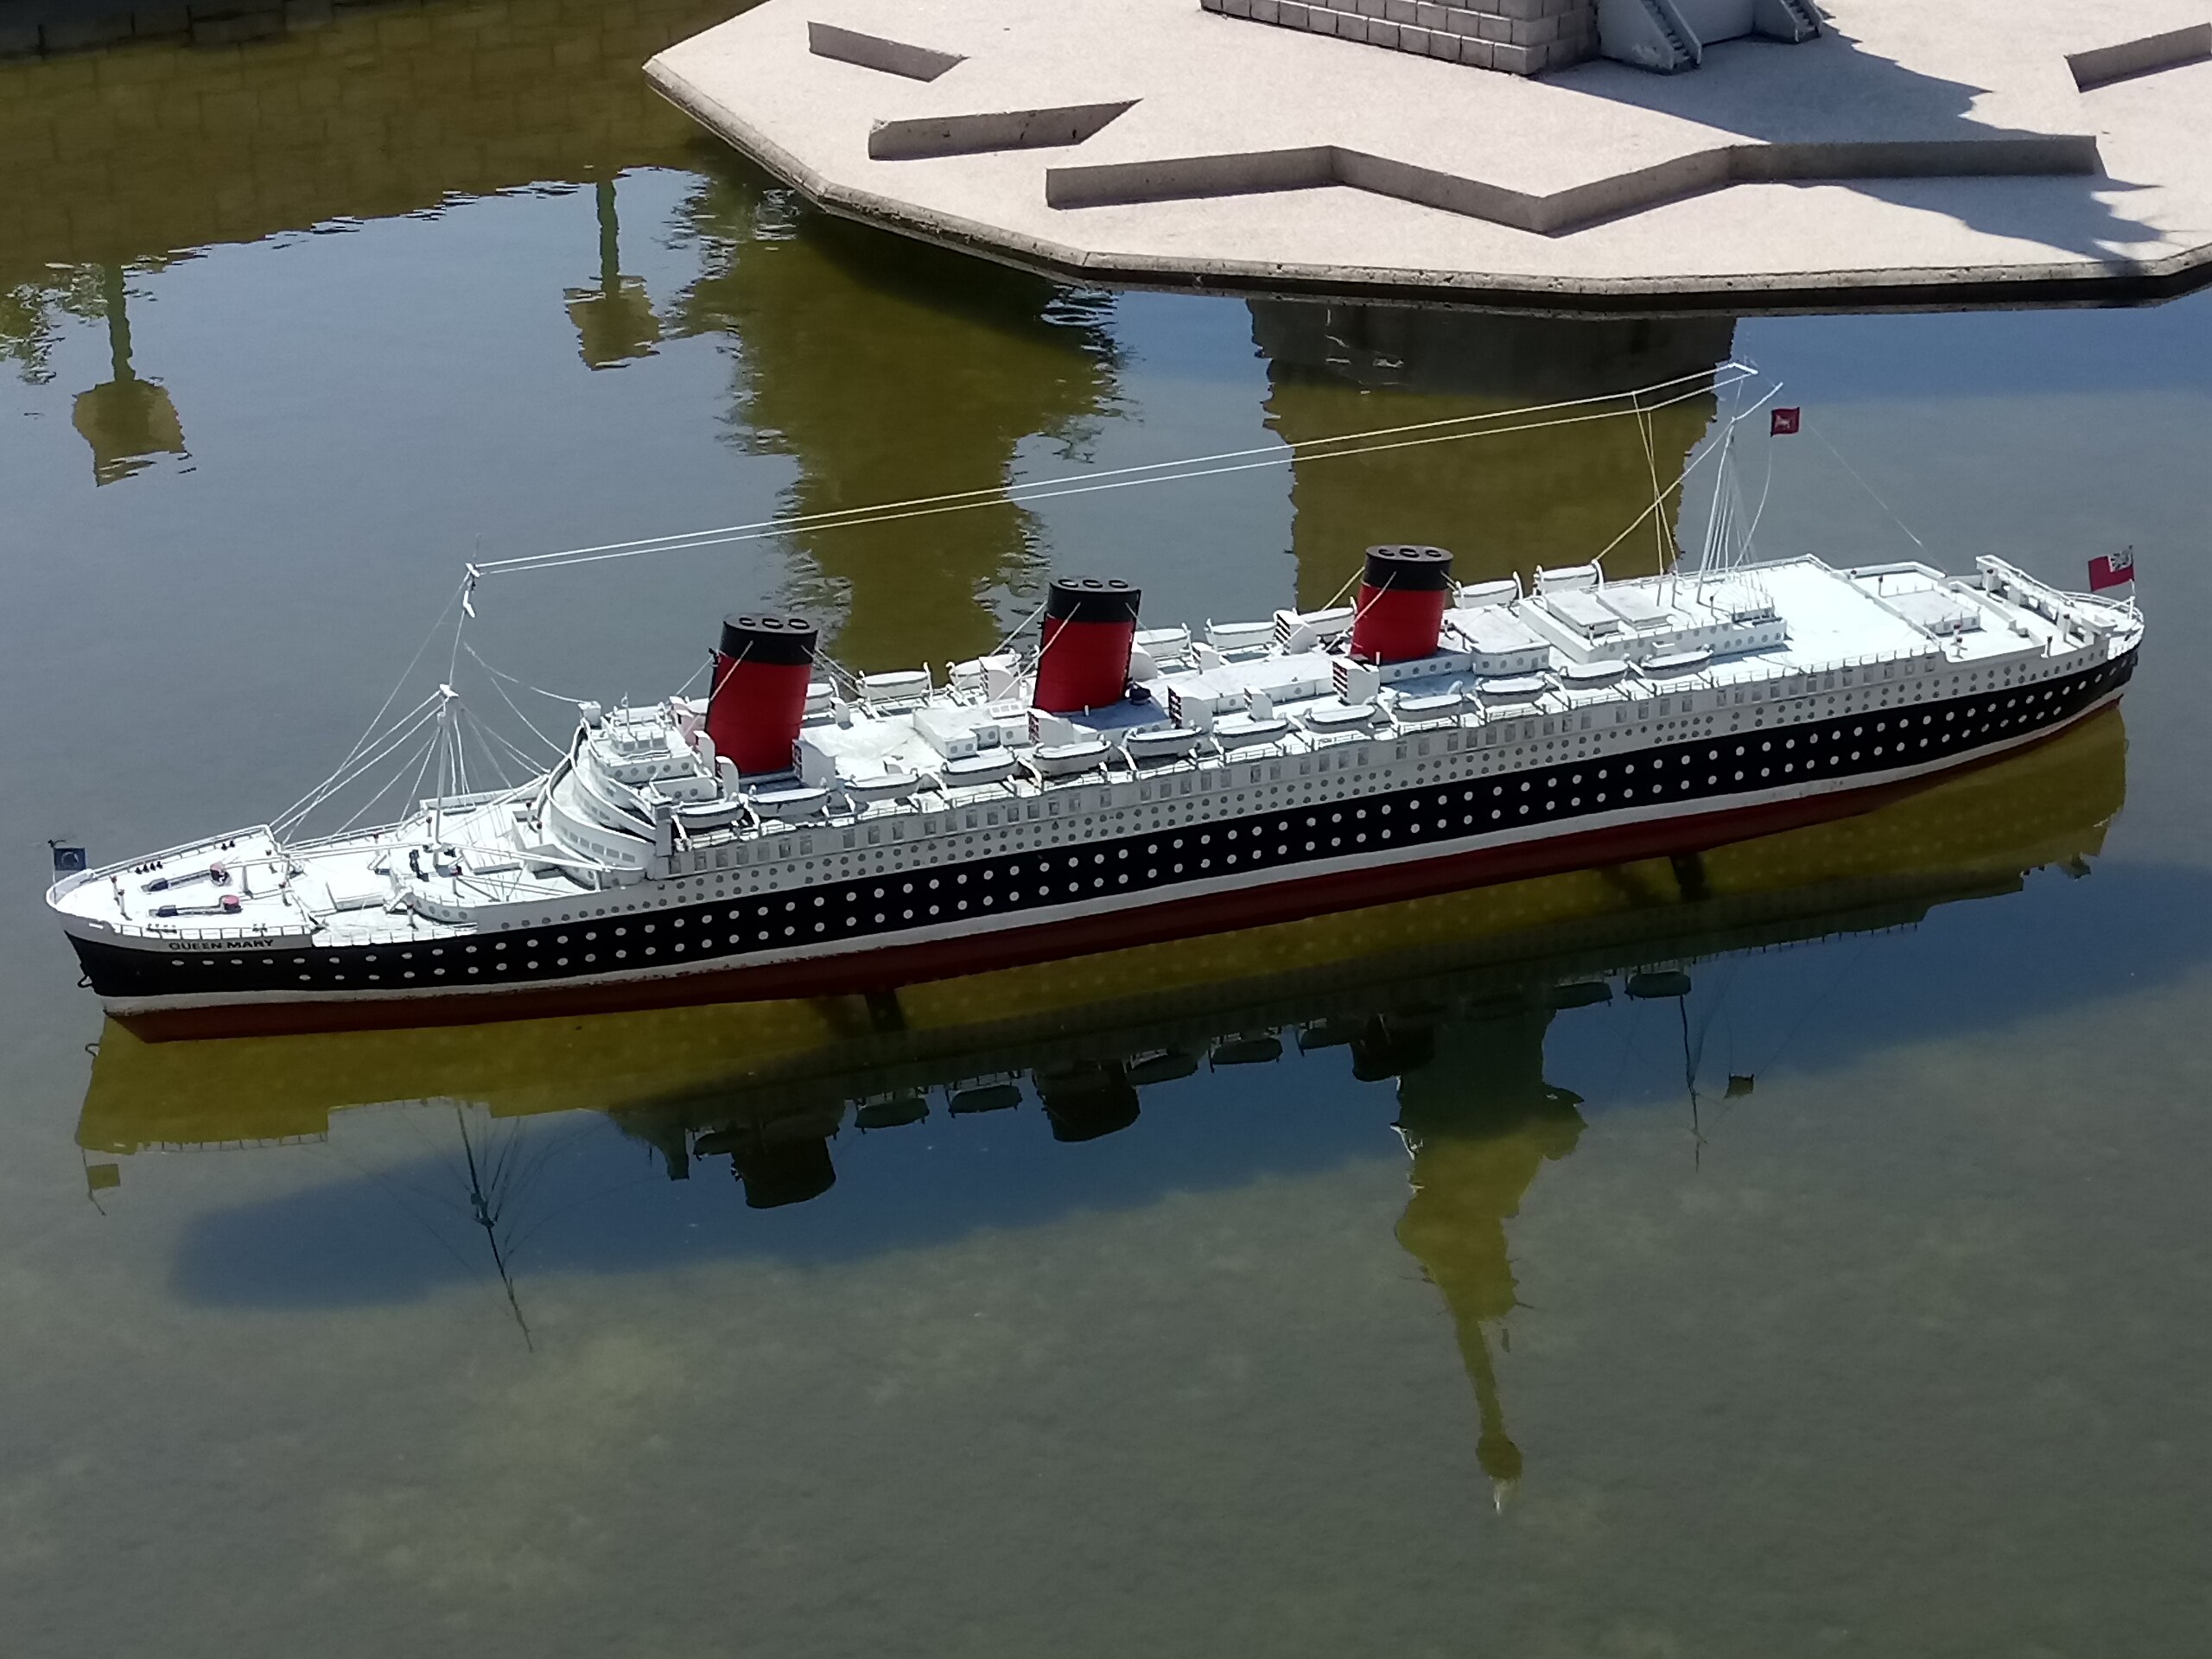 File:RMS Queen Mary model.jpg - Wikimedia Commons